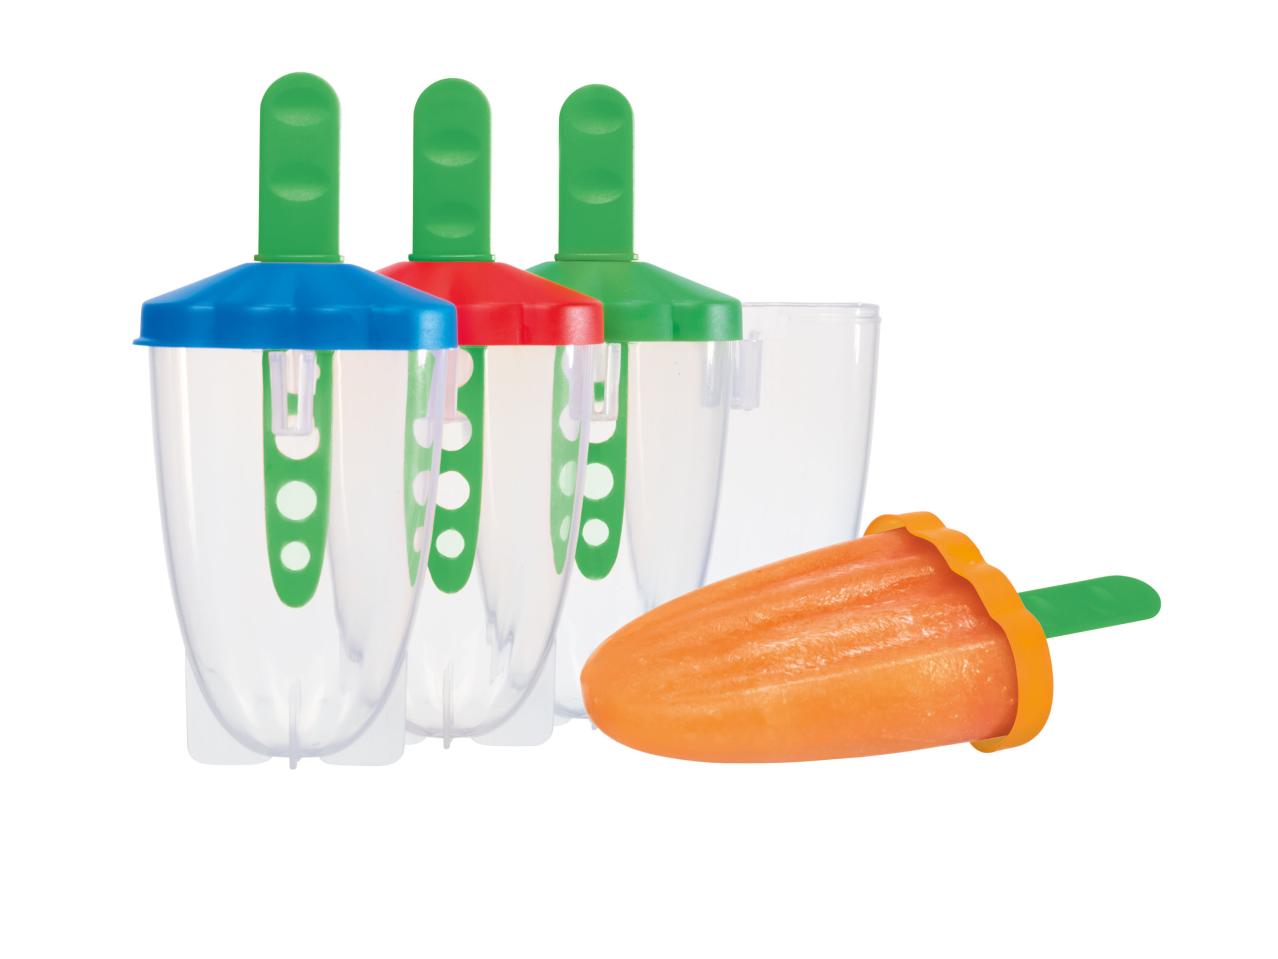 Ice Lolly Moulds